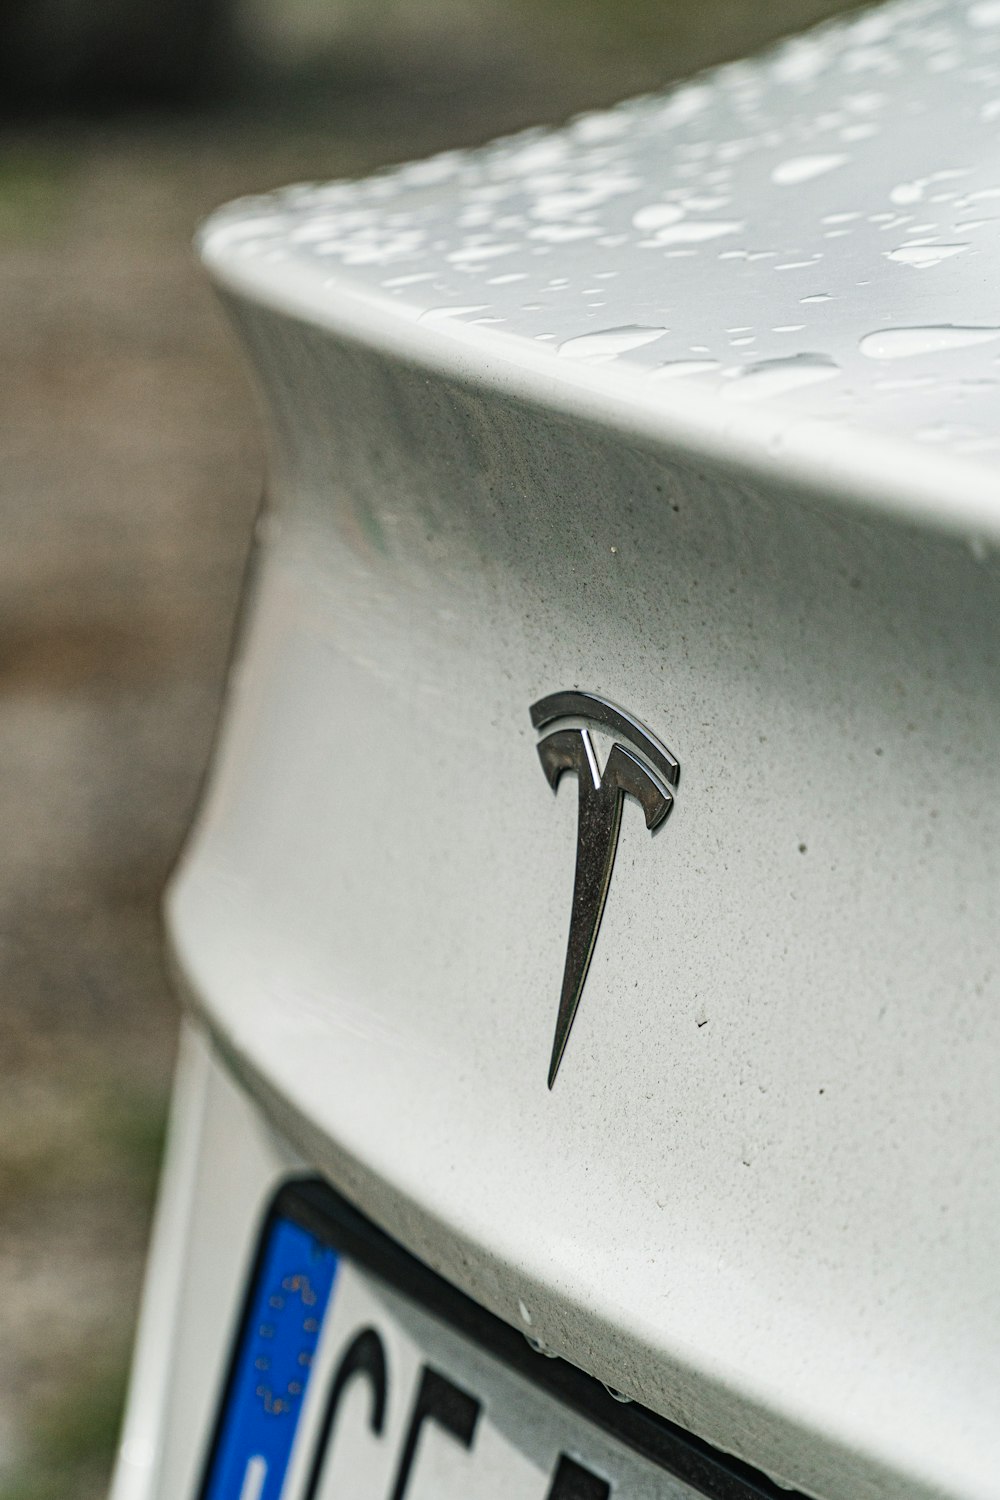 a close up of a key on a car's license plate